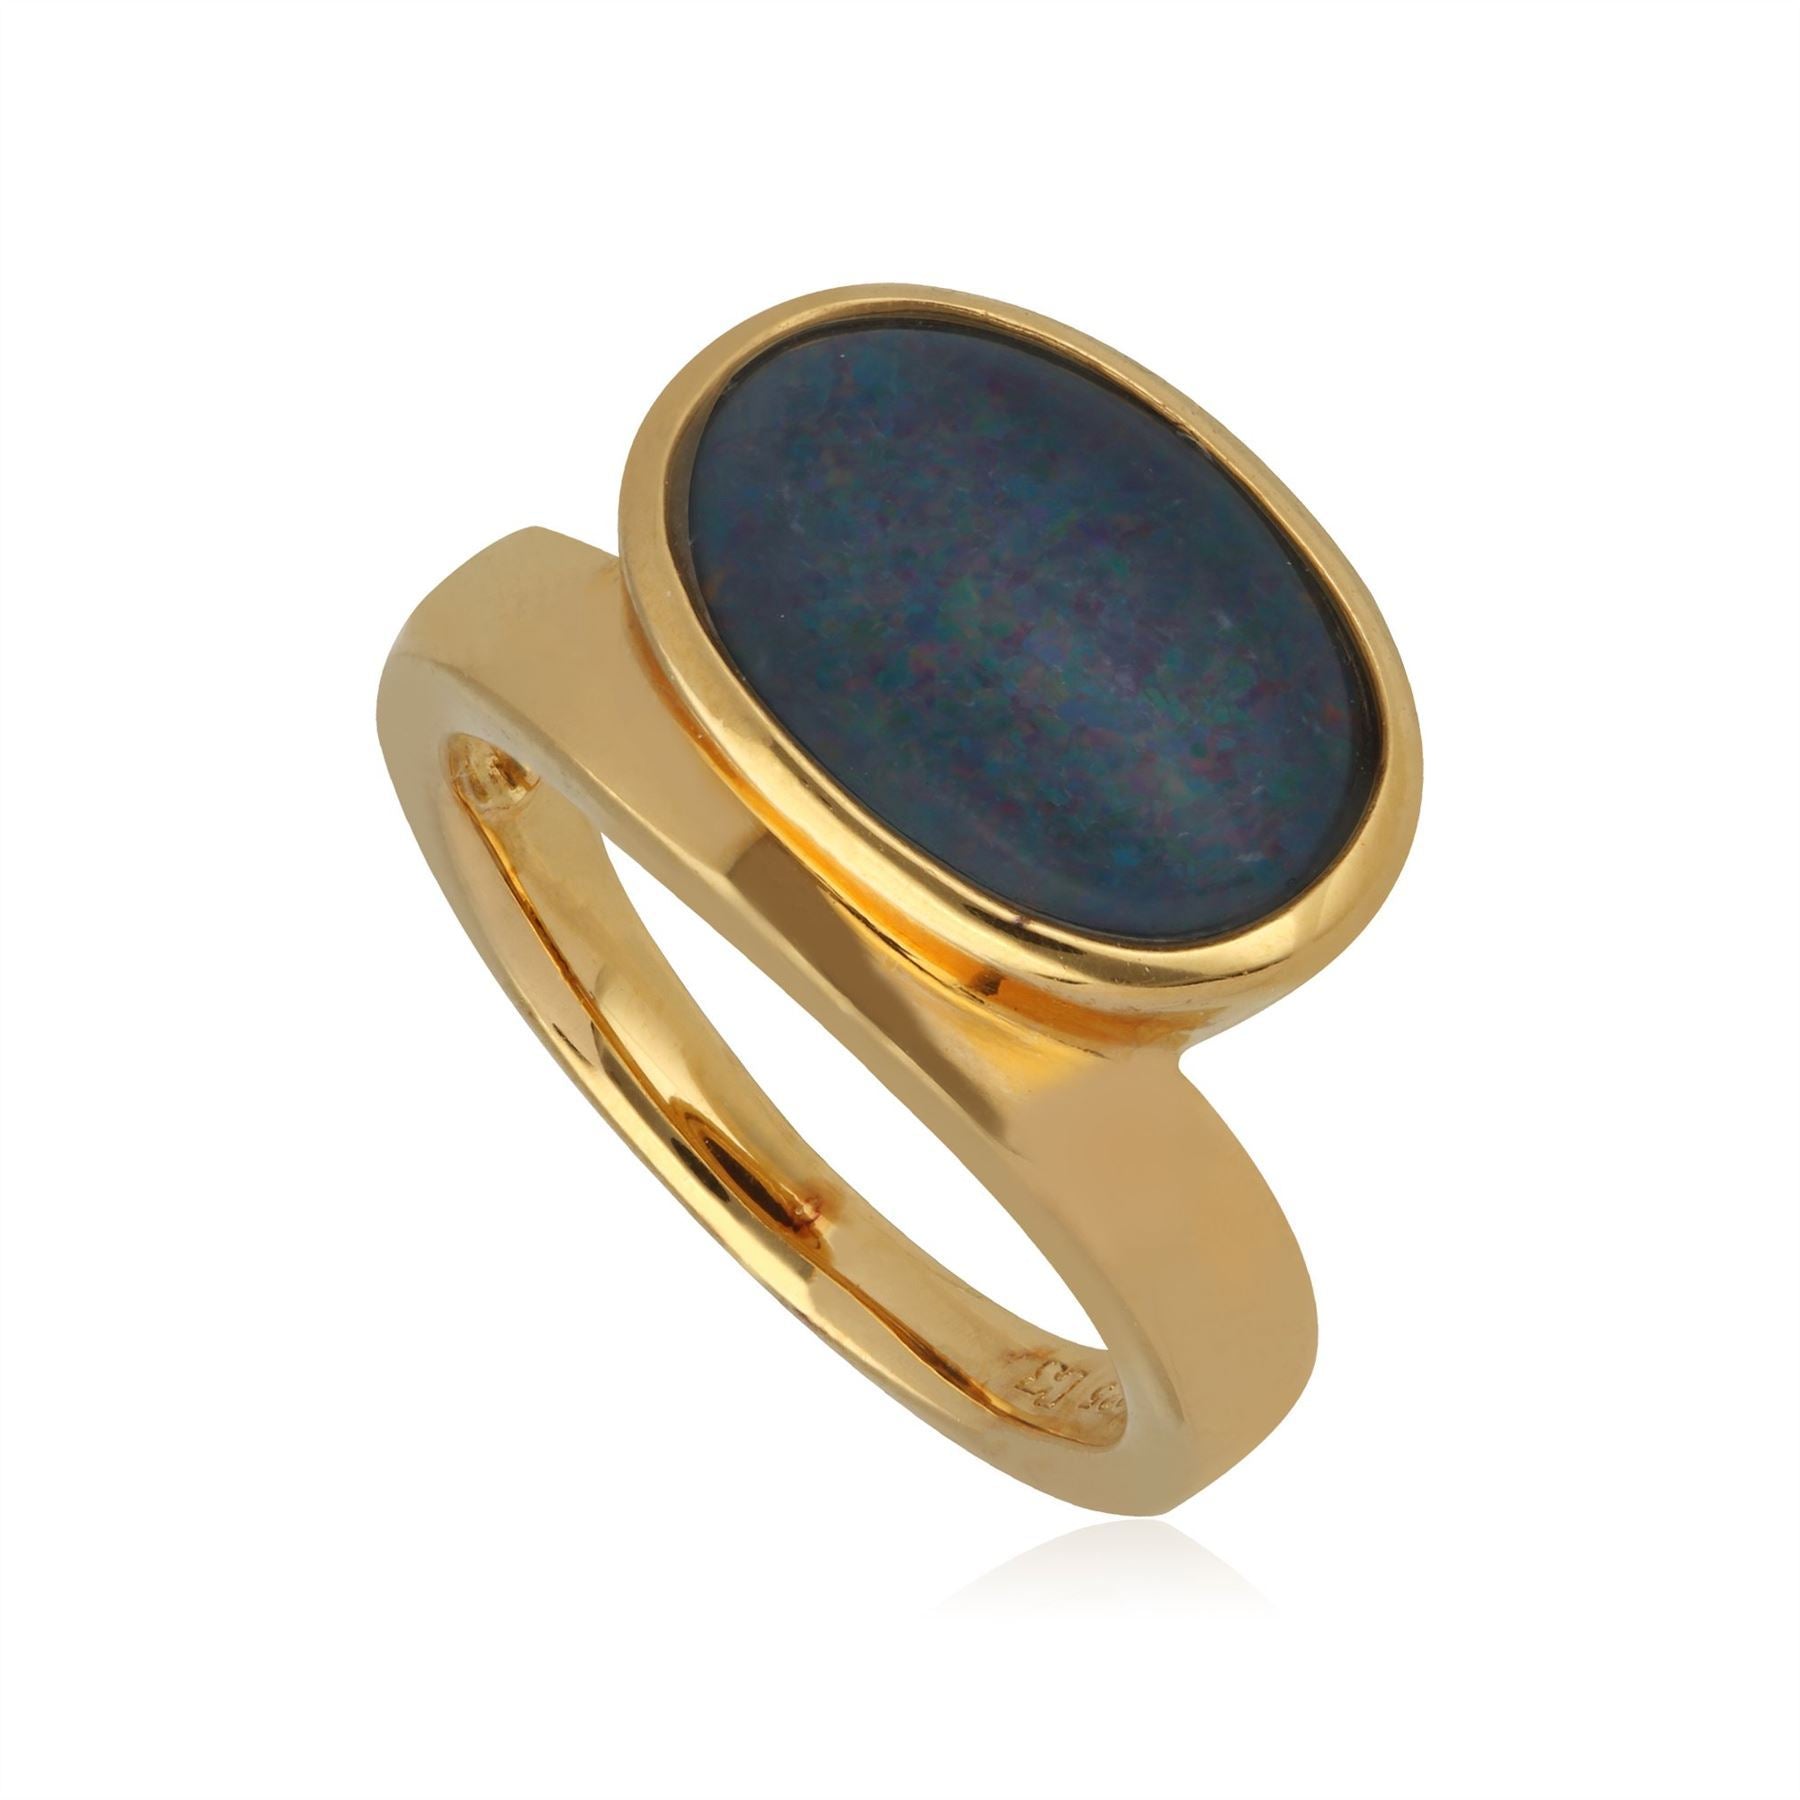 Kosmos Opal Cocktail Ring in Yellow Gold Plated Sterling Silver